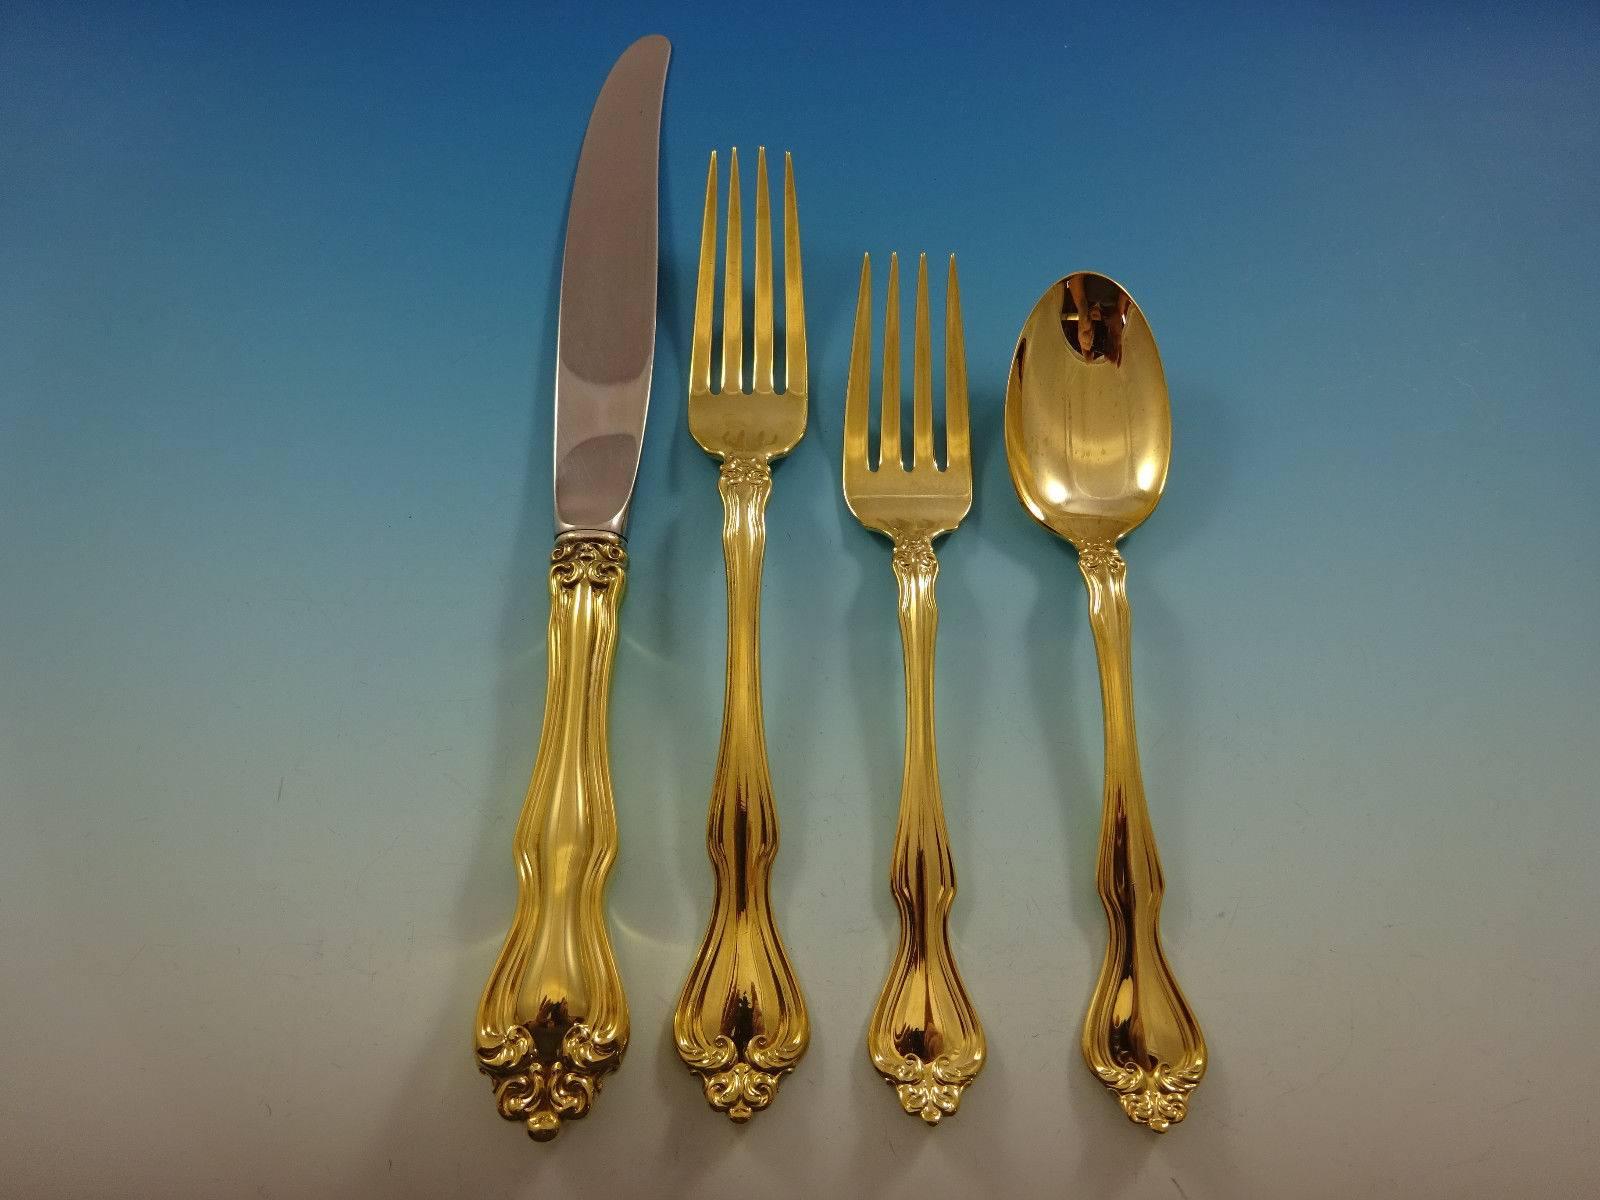 George and Martha by Westmorland sterling silver flatware set of 32 pieces. Gold flatware is on trend and makes a bold statement on your table, especially when paired with gold rimmed china and gold accents. 

This set is vermeil (completely